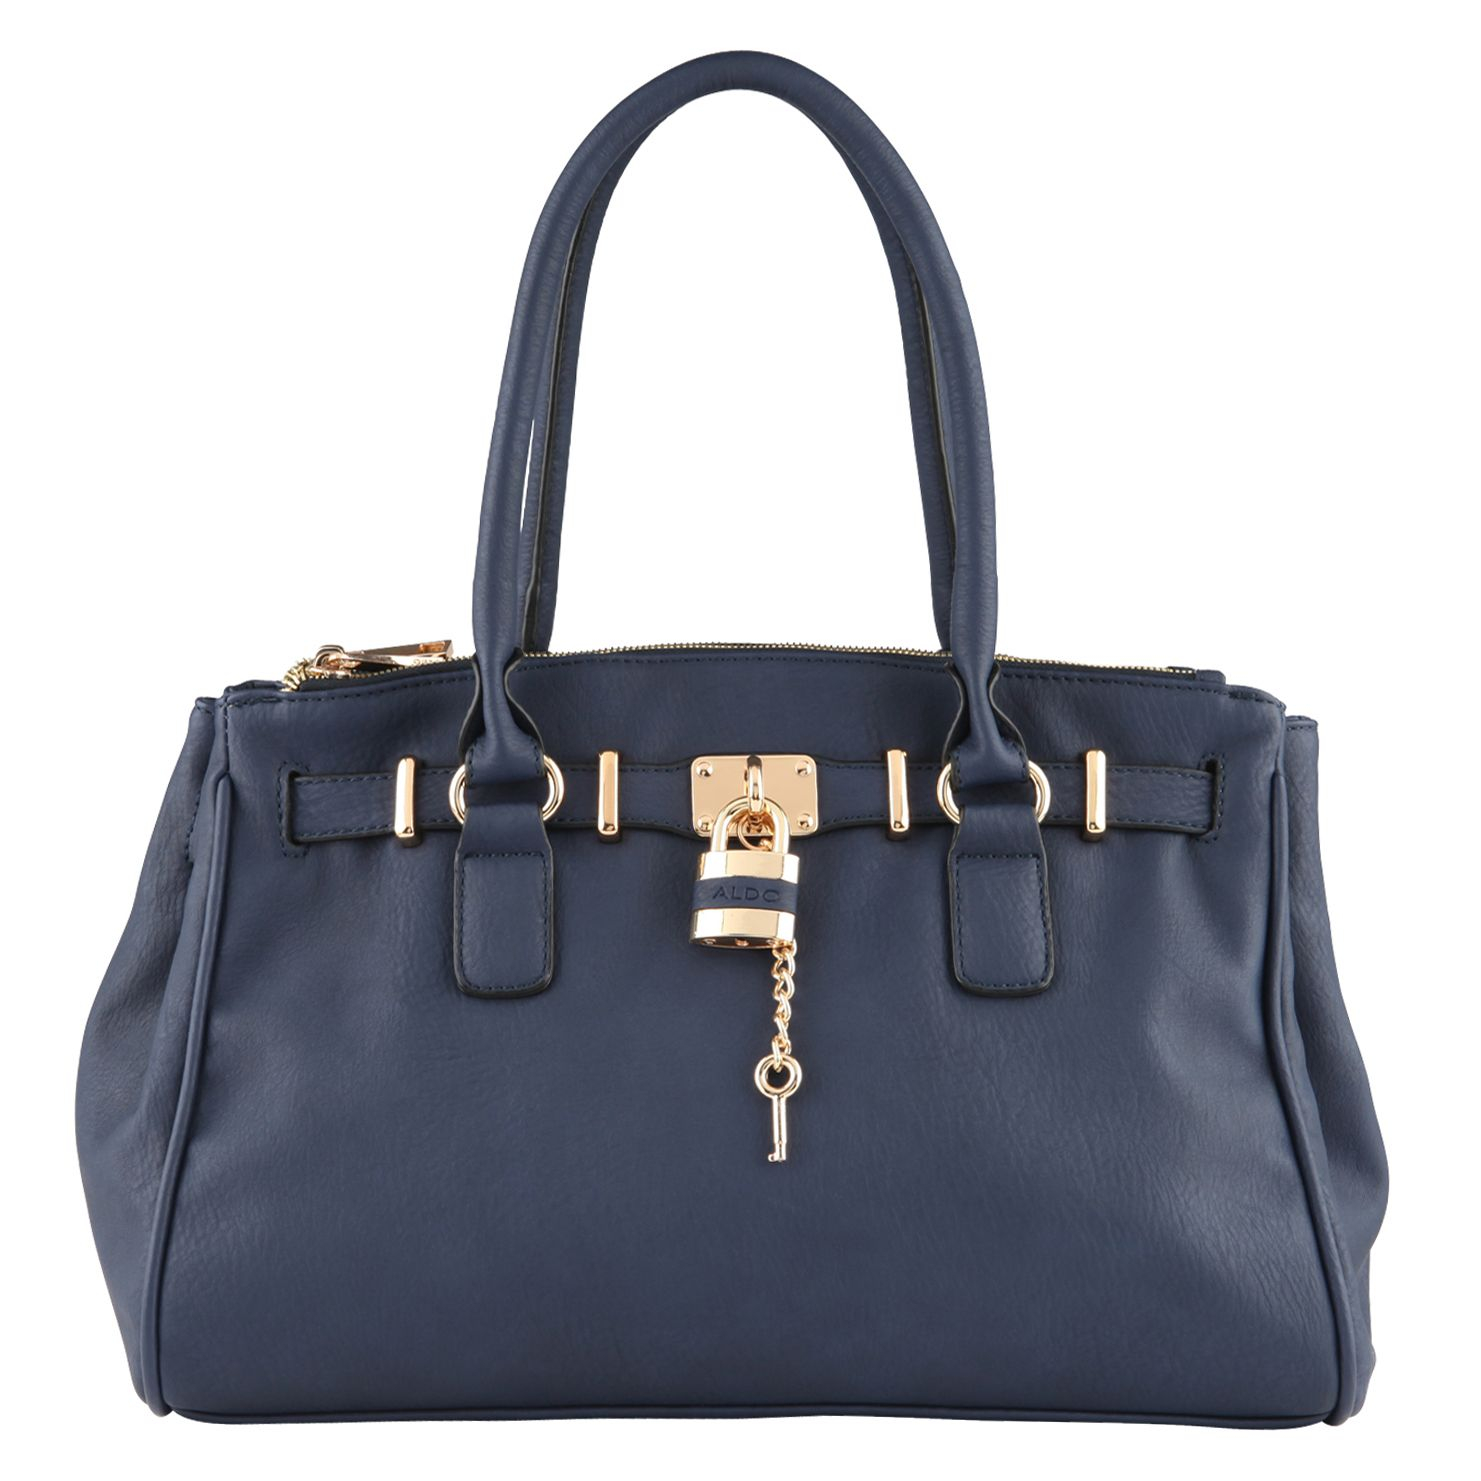 Aldo galega tote bags. Be ready for a season of high style and ...